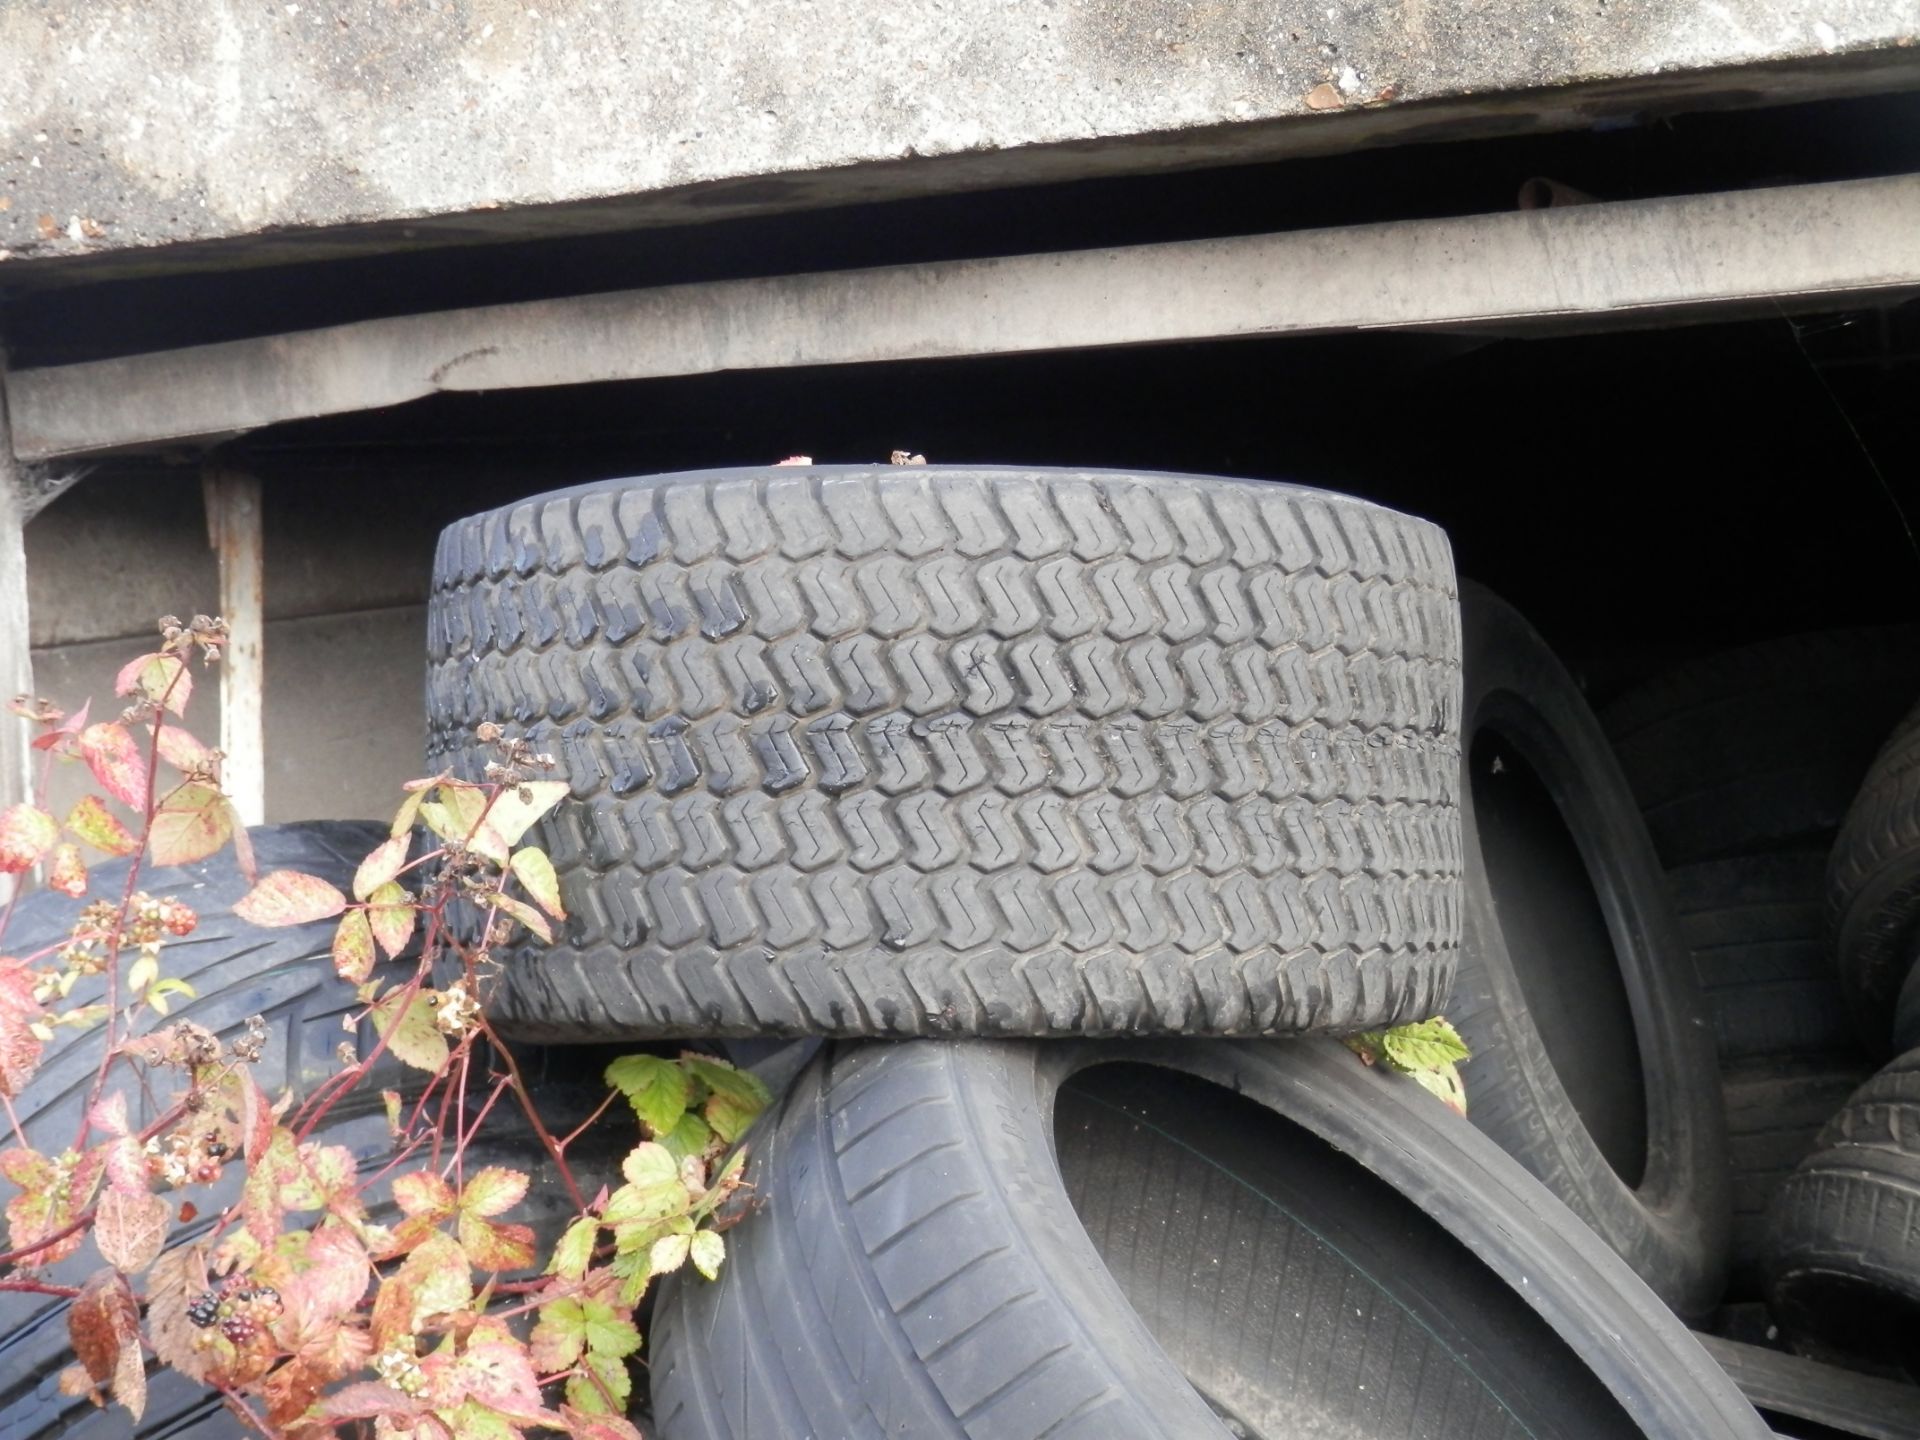 3 GARAGES FULL OF USED, PART WORN TYRES. ASSORTED FROM CAR TO LORRY TYRES. POSSIBLY 800+ - Bild 7 aus 9